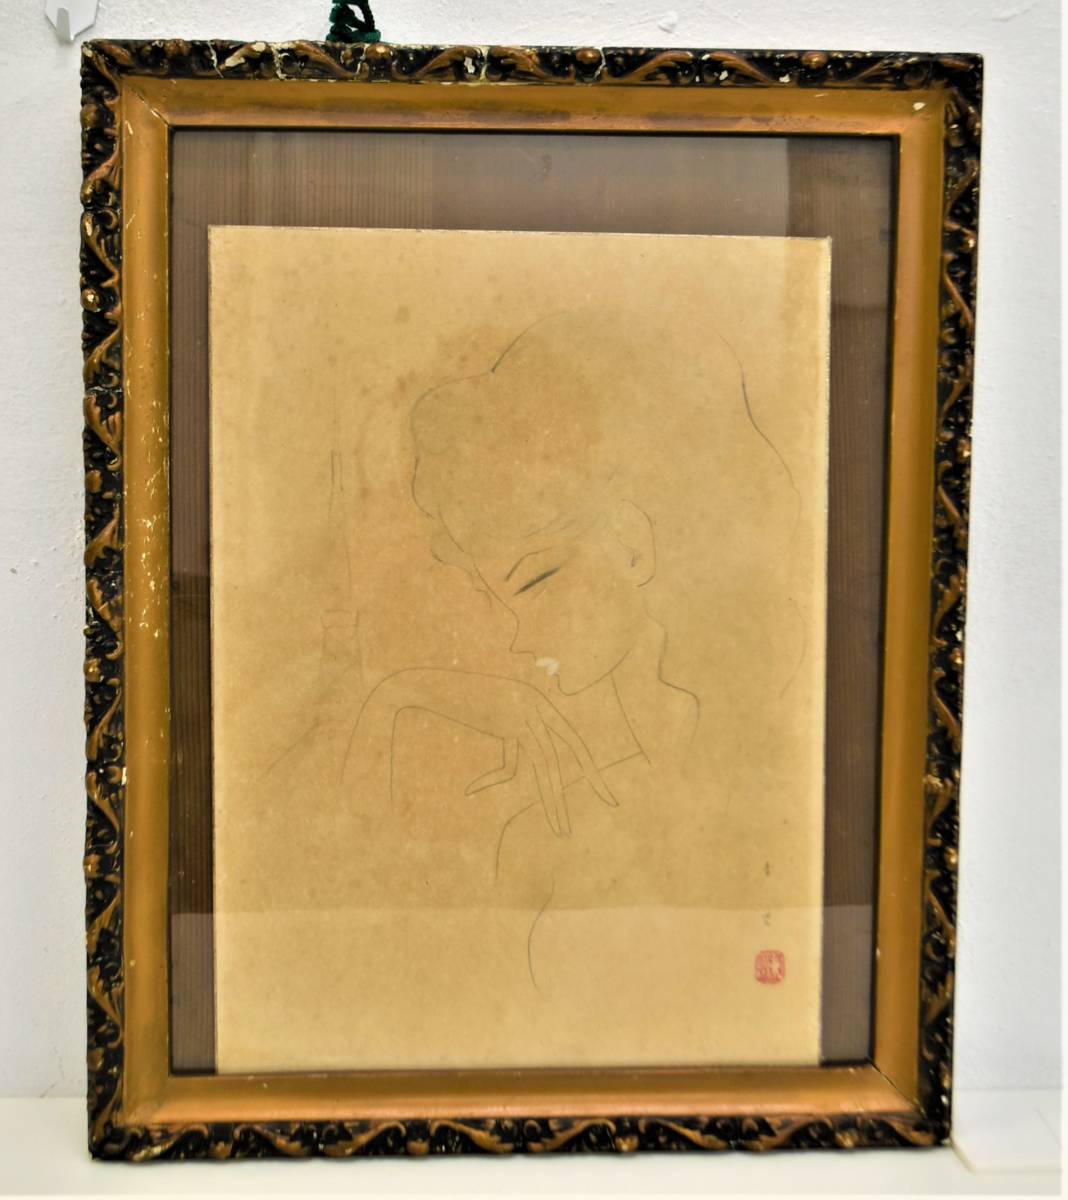 ① higashi . blue . pencil sketch woman autograph square fancy cardboard person image tower picture work of art . wall decoration picture frame attaching 